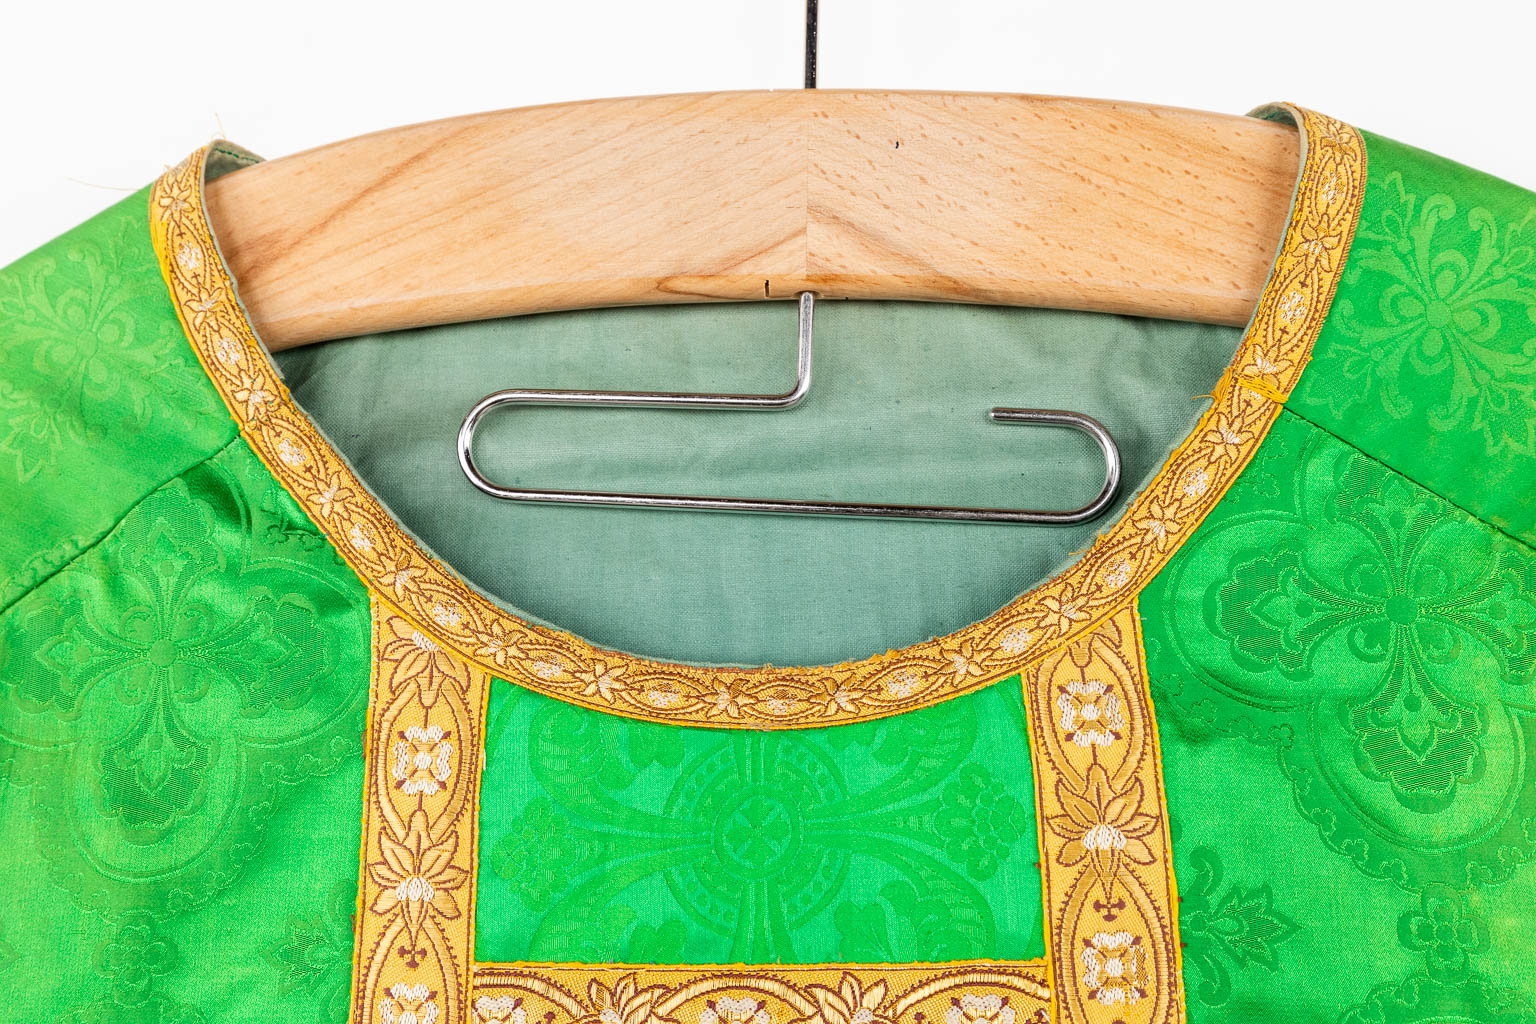 A set of 5 antique Roman Chasubles with two matching stola and a Chalice veil.